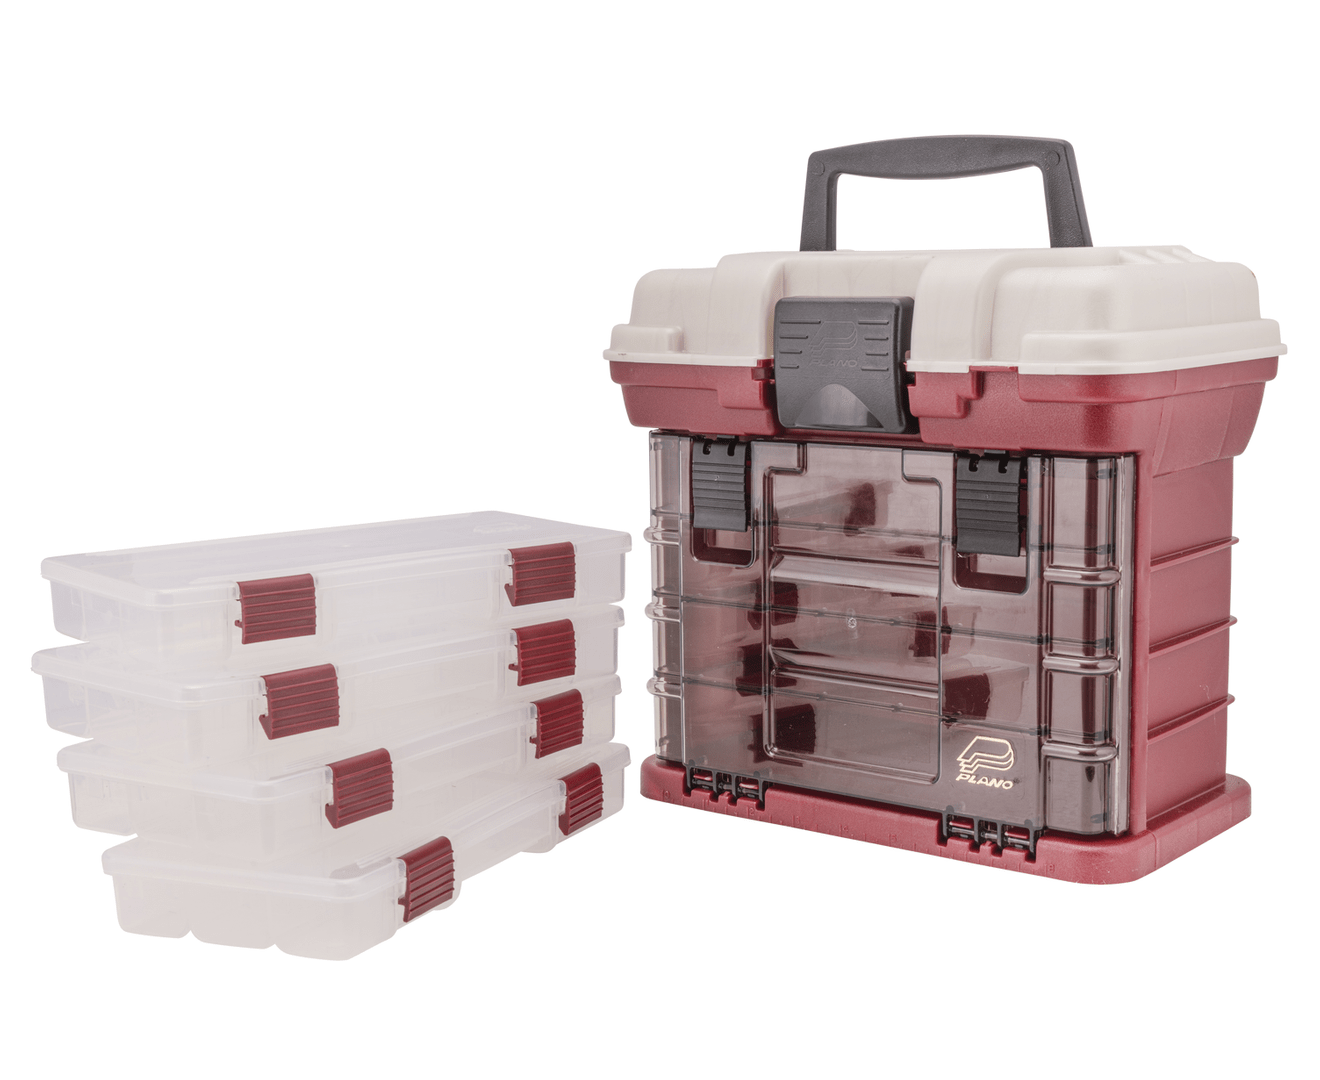 Plano 3500 Series 4 Tray Red/Silver Tackle Box -  - Mansfield Hunting & Fishing - Products to prepare for Corona Virus